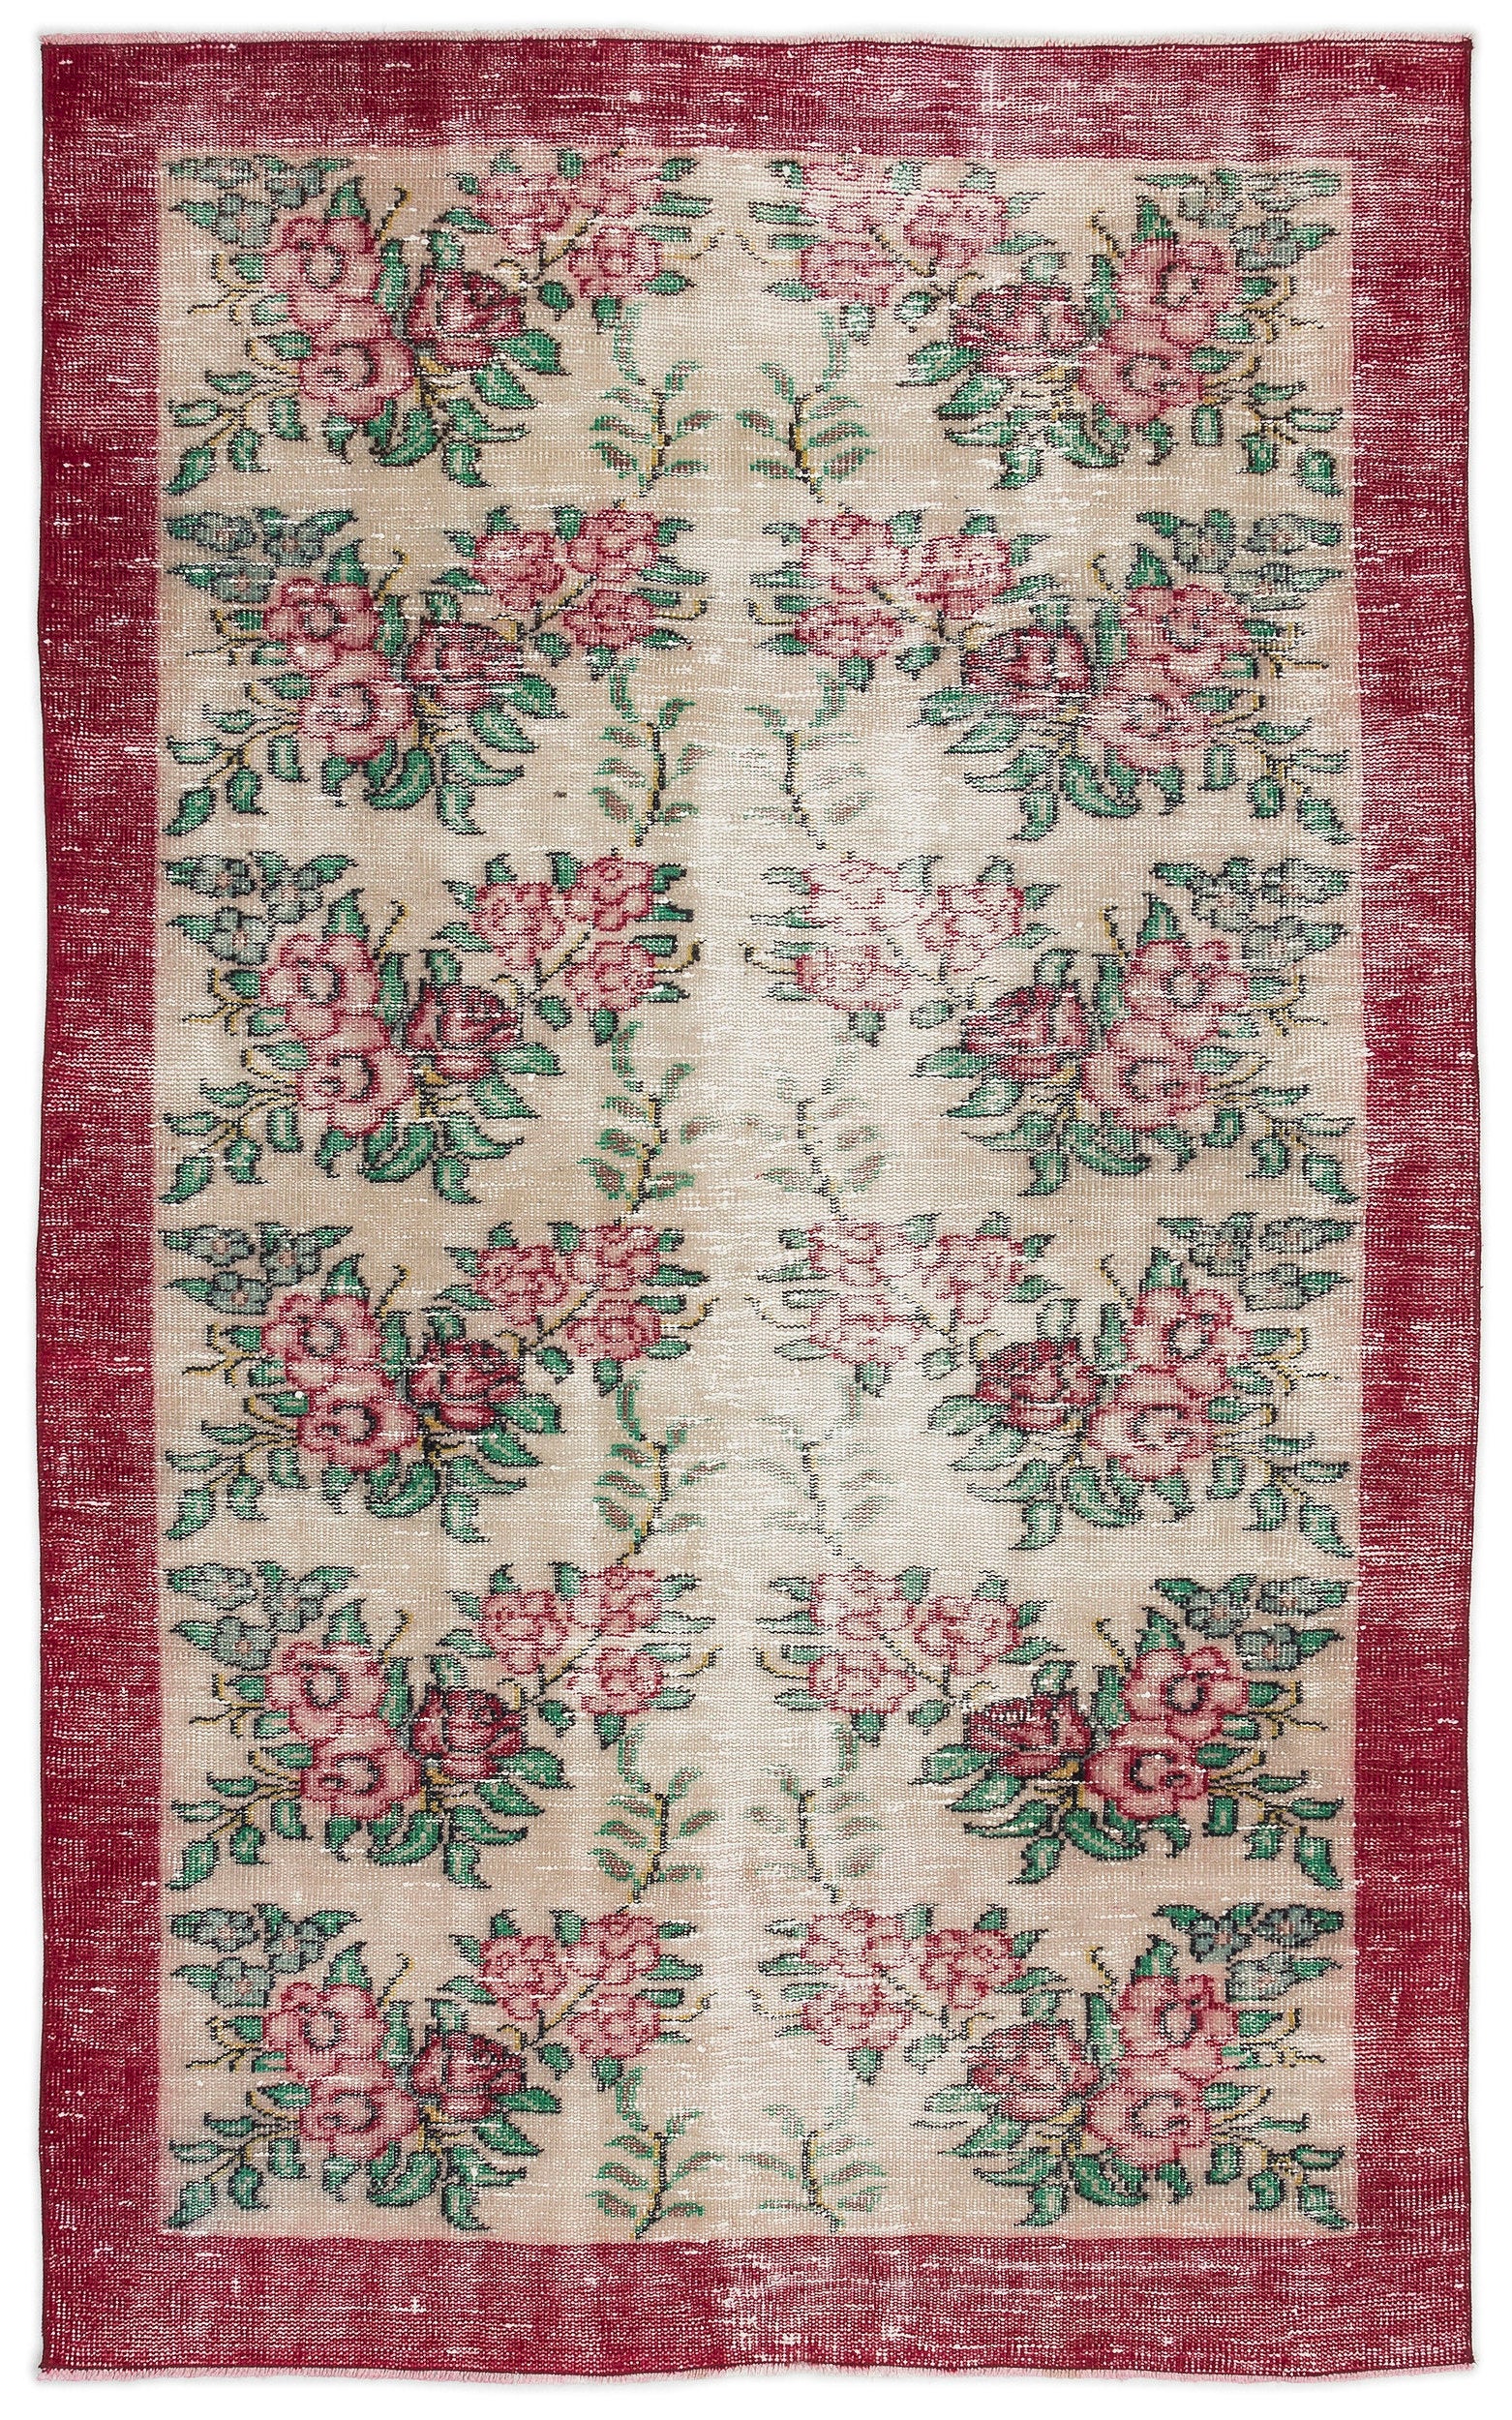 Retro Over Dyed Vintage Rug 4'9'' x 7'10'' ft 145 x 238 cm